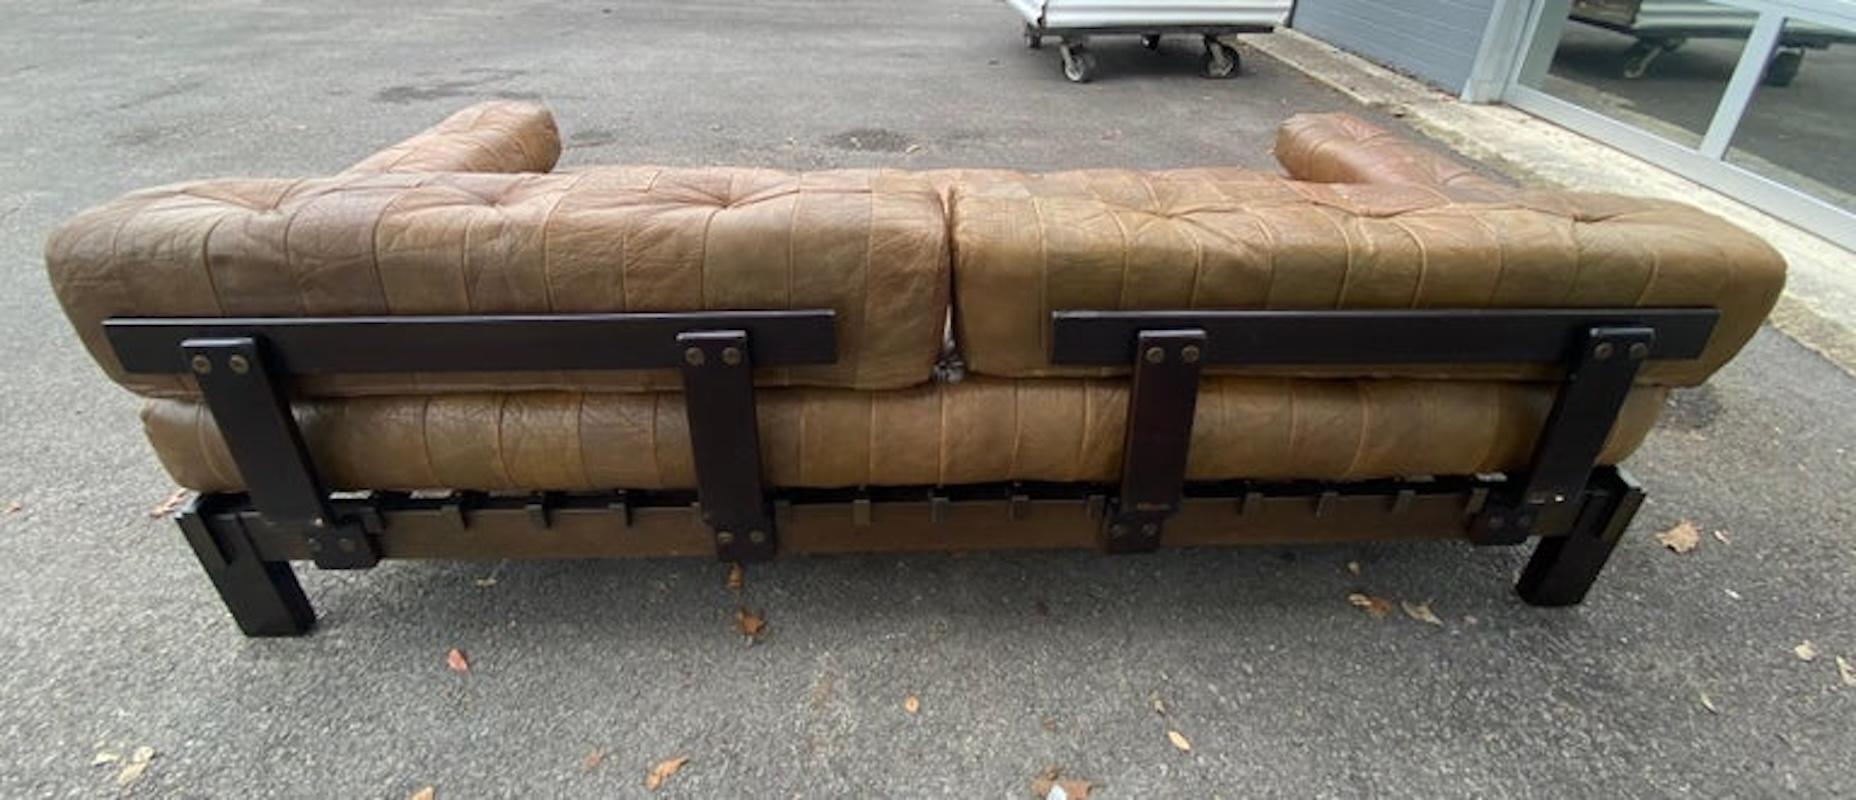 Mid-Century Modern Vintage Leather Patchwork Sofa Daybed, Circa 1970s For Sale